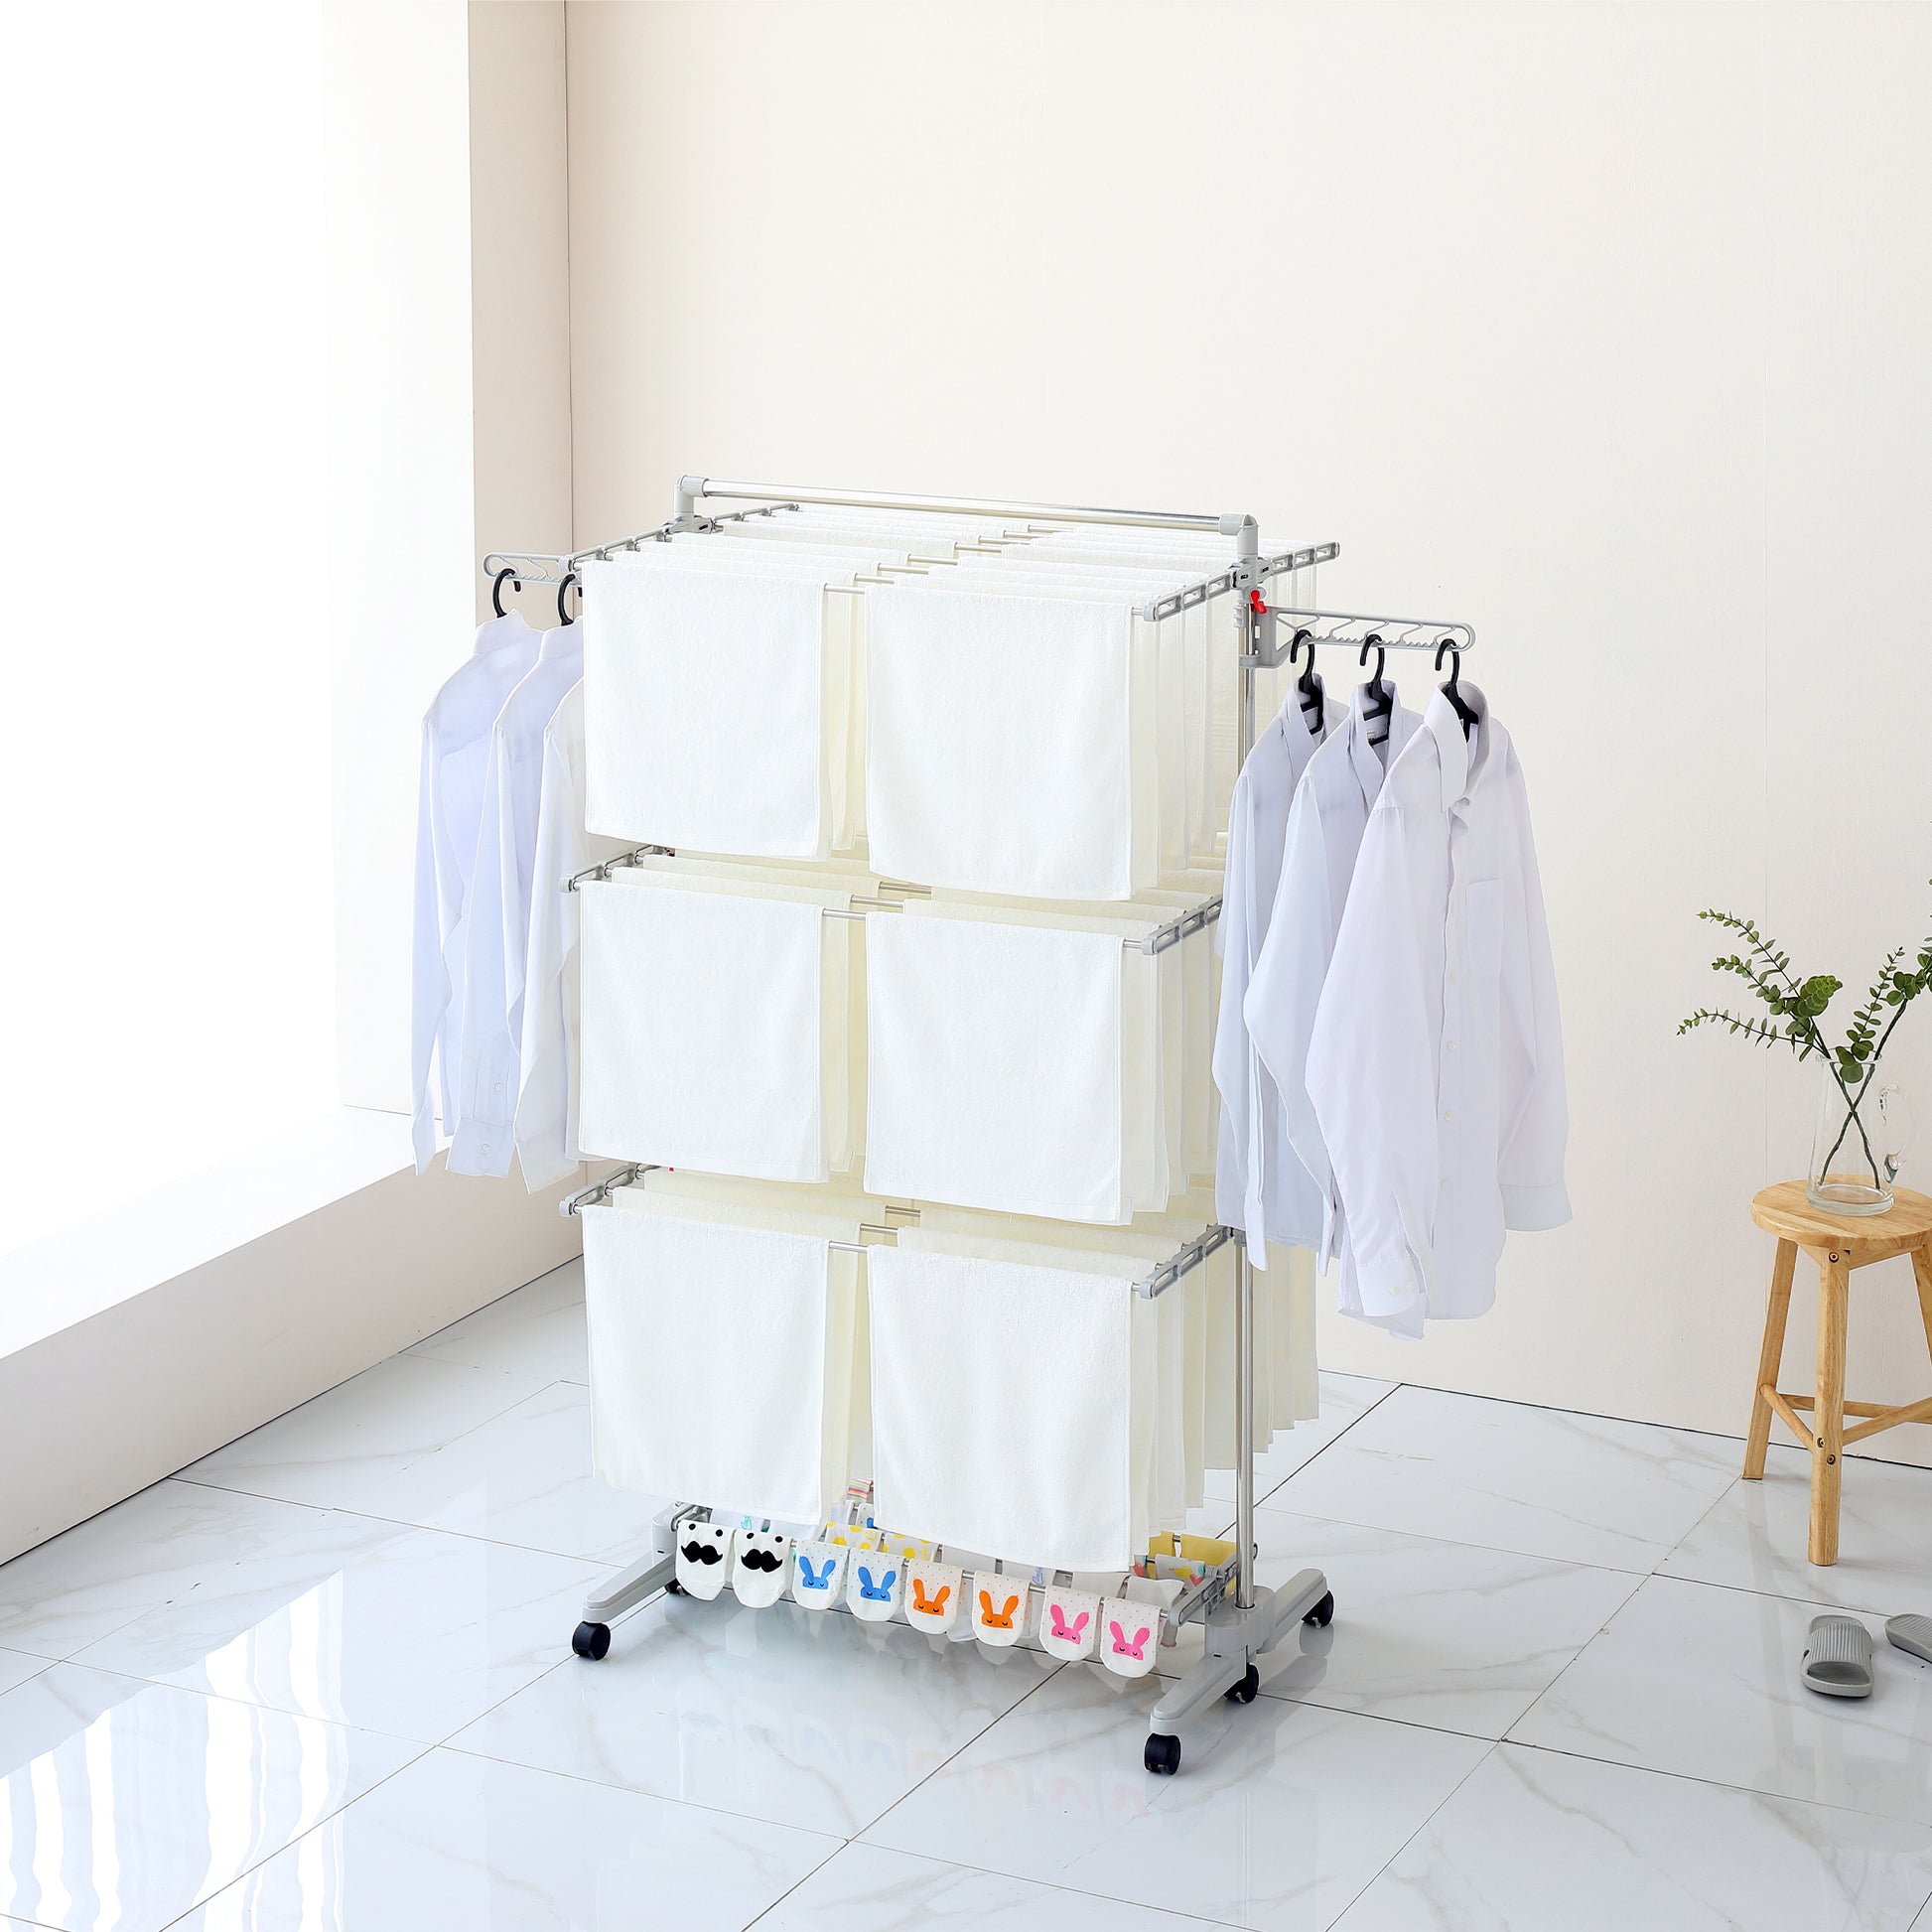 Hulife 57 1/2 in. x 55 in. 3-Tier Foldable Clothes Drying Rack, Stainless Steel/Gray